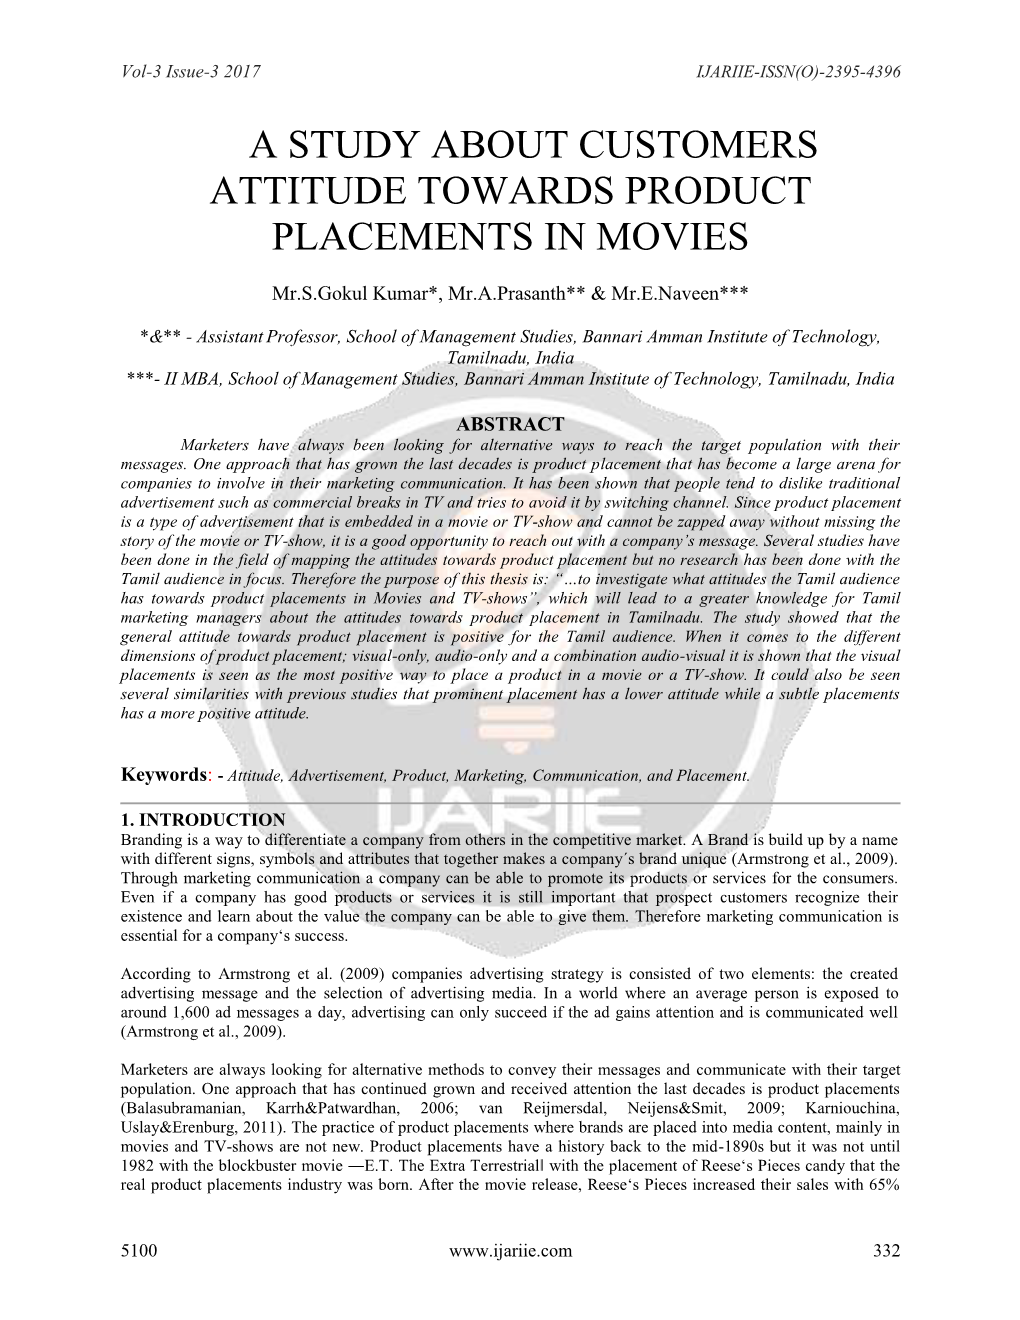 A Study About Customers Attitude Towards Product Placements in Movies